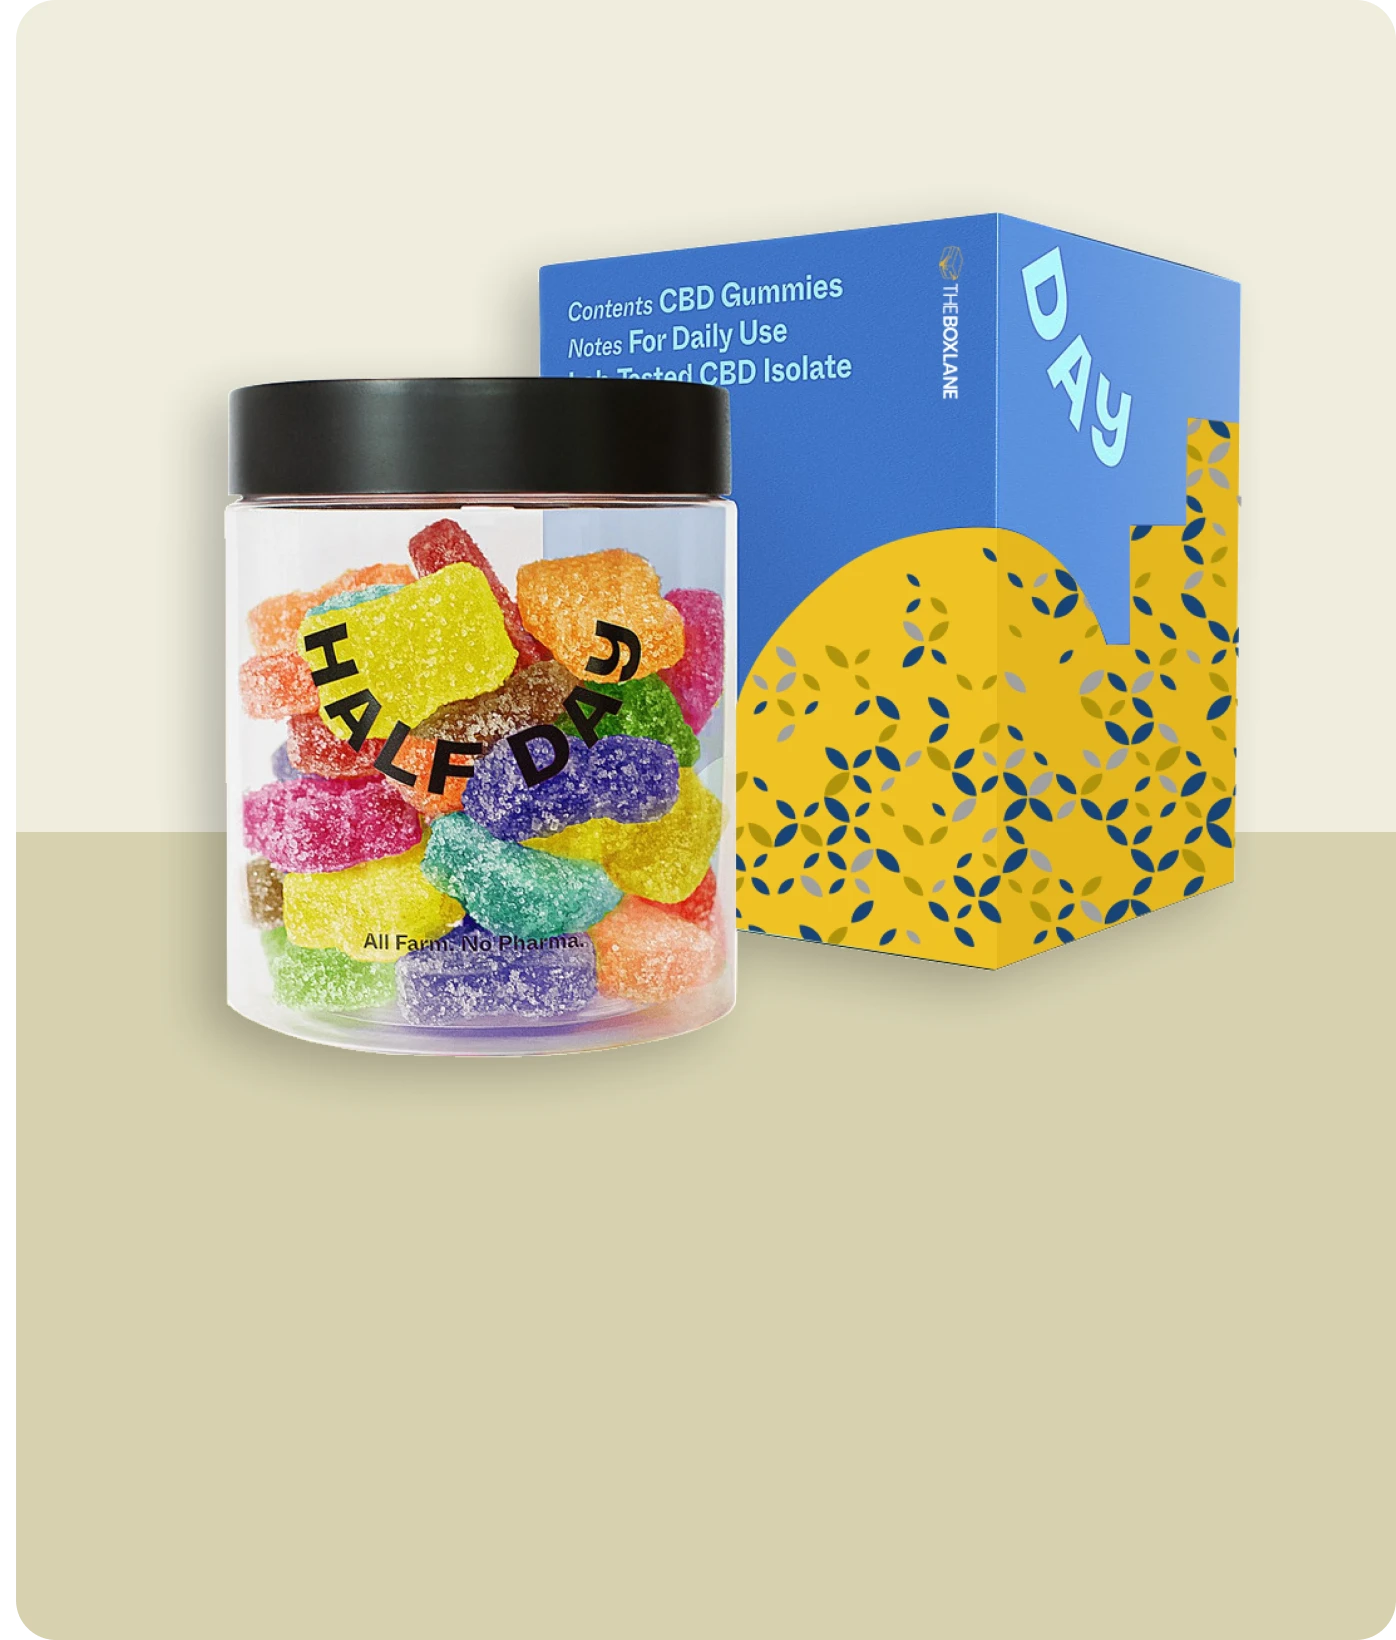 CBD Gummies Boxes related products | The Box Lane